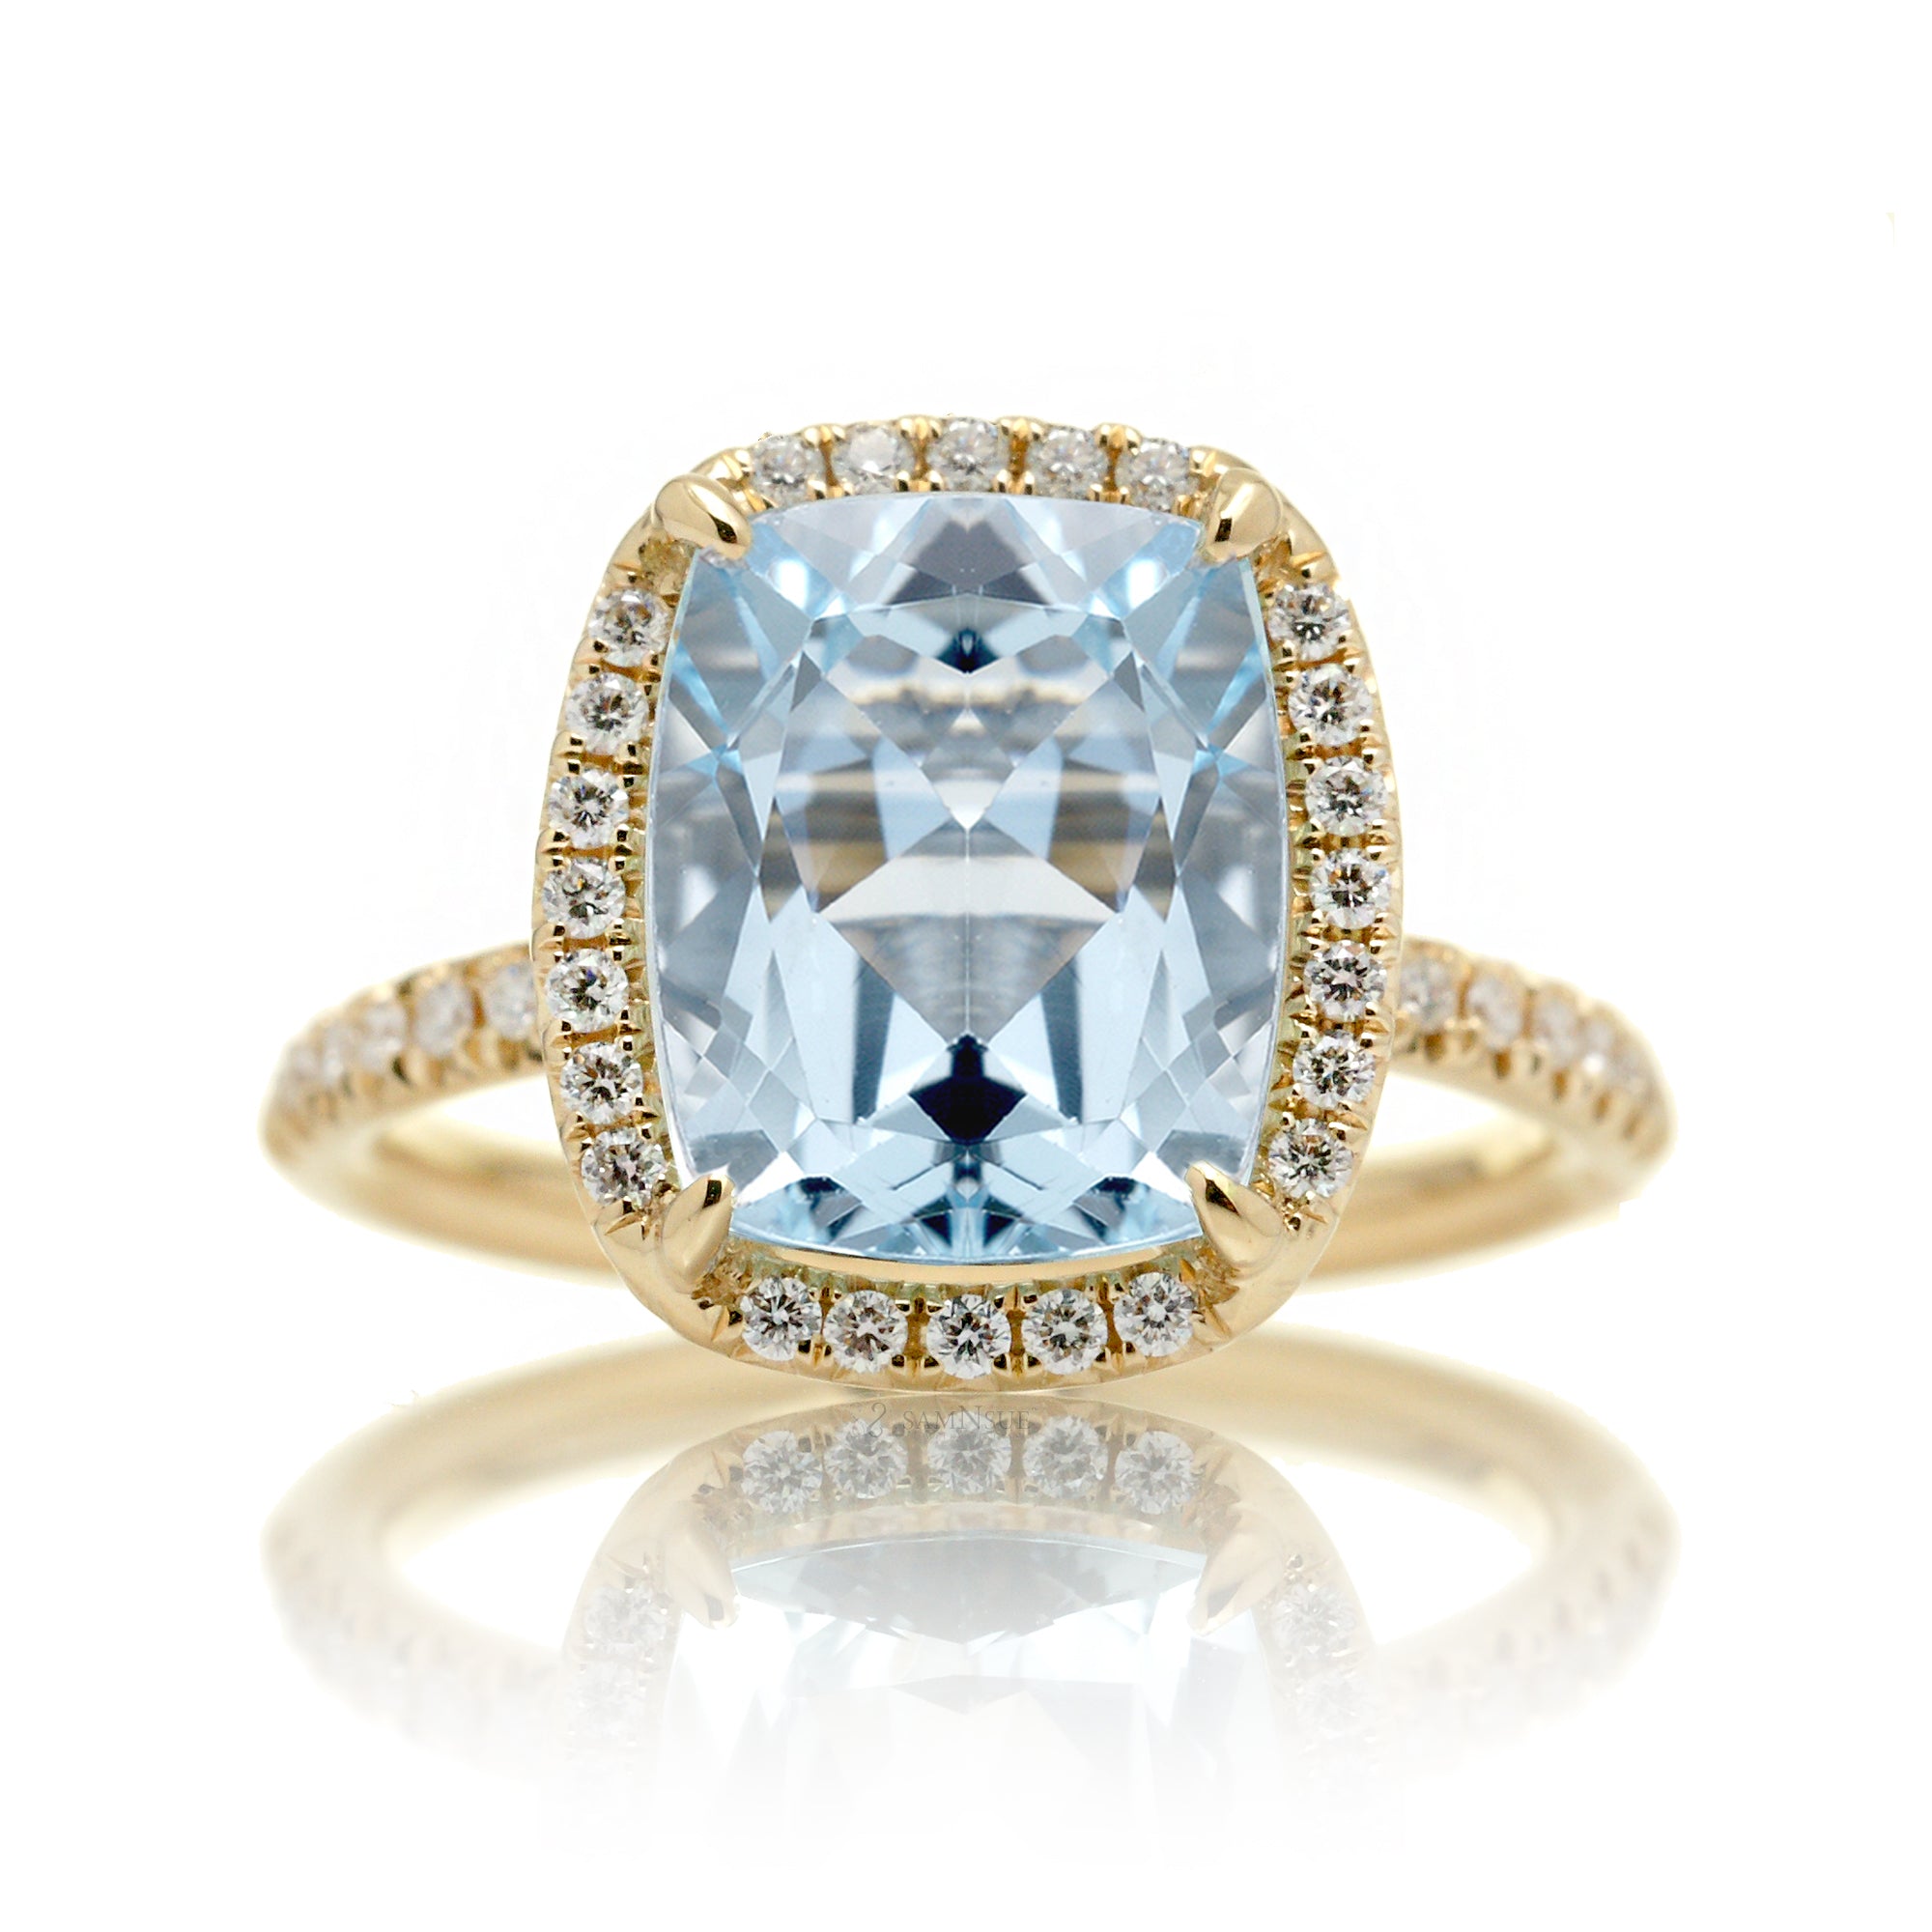 The Drenched Cushion Aquamarine Ring